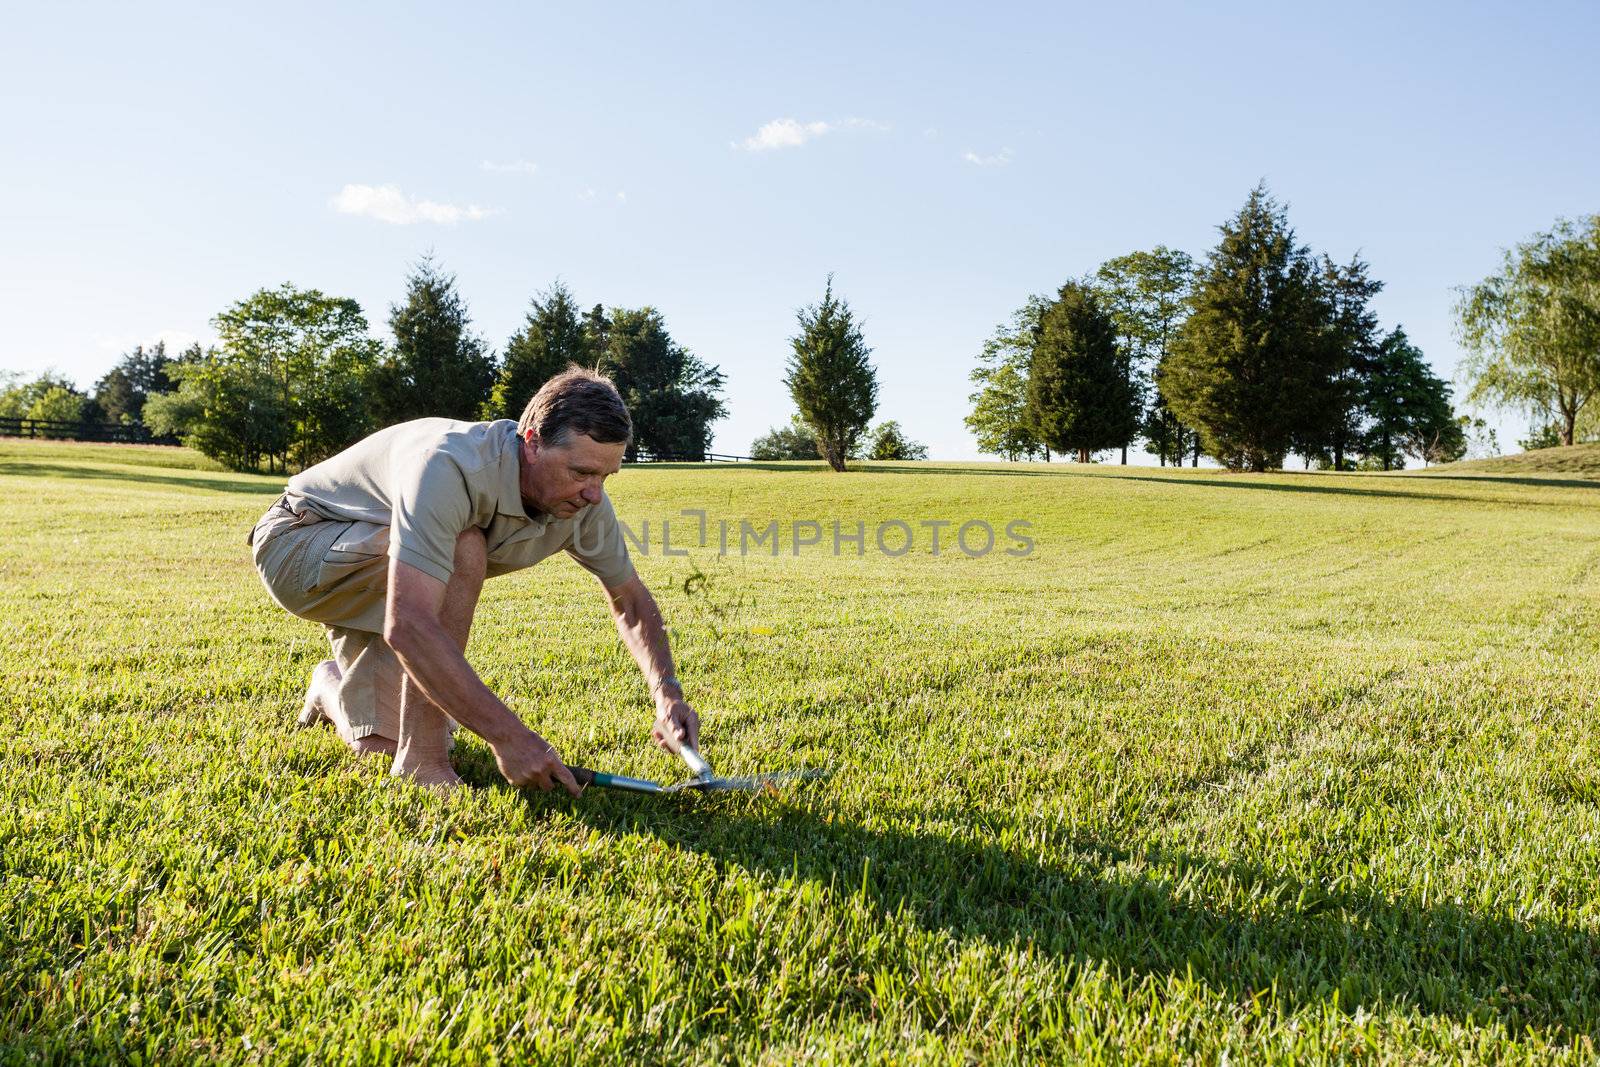 Challenging task of cutting large lawn with grass shears by hand